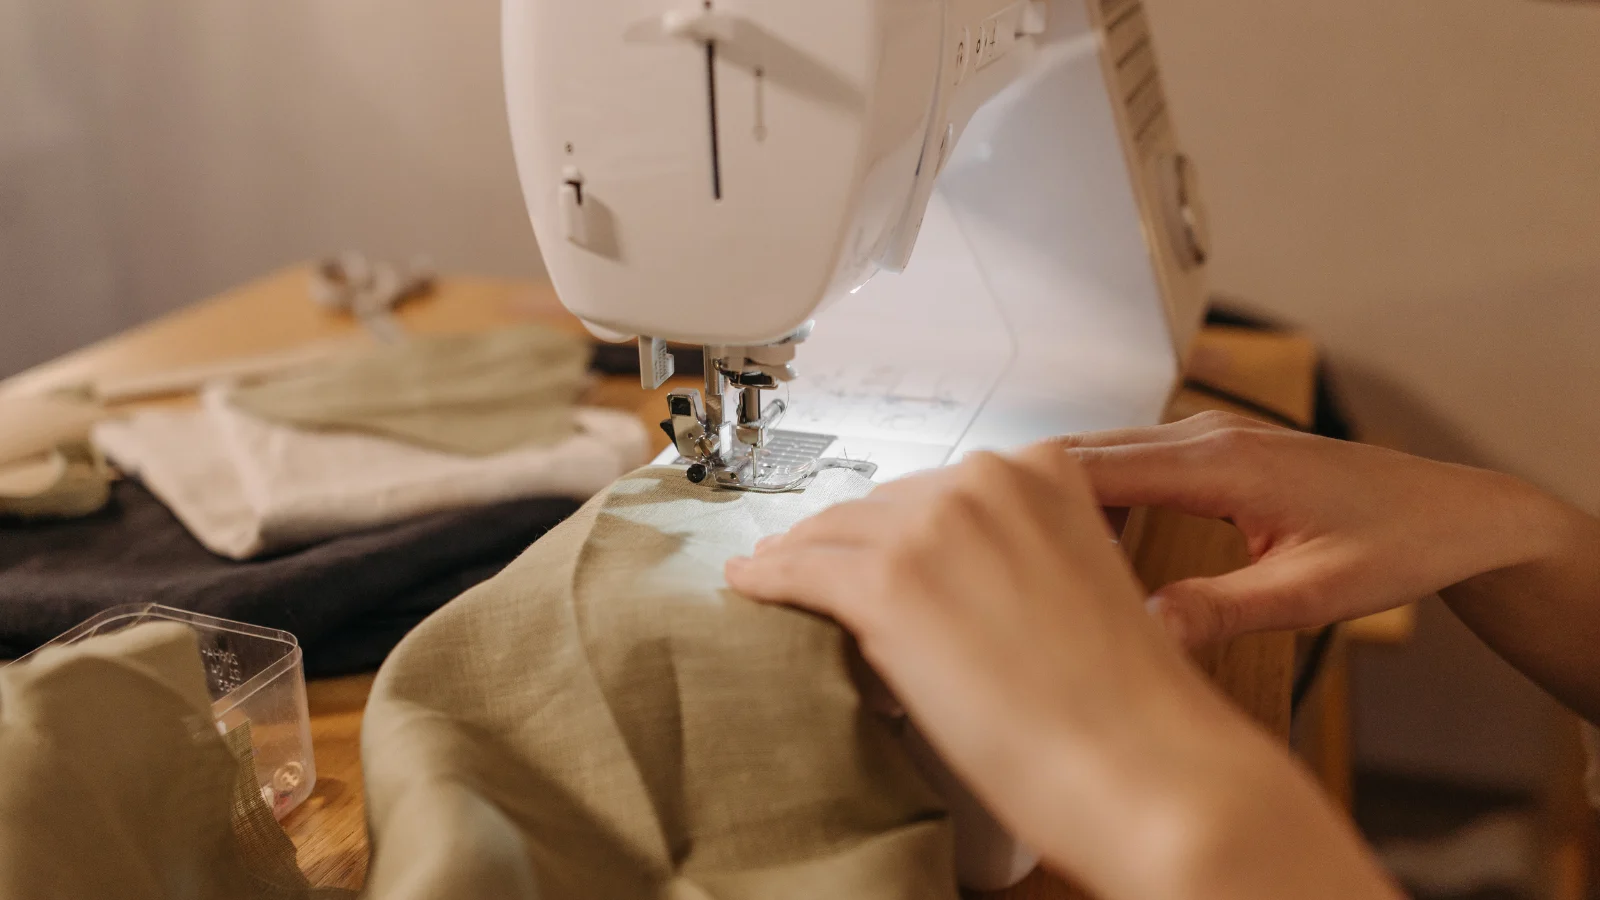 How to Sew Canvas Like a Pro: 10 Best Tips for Sewing Canvas